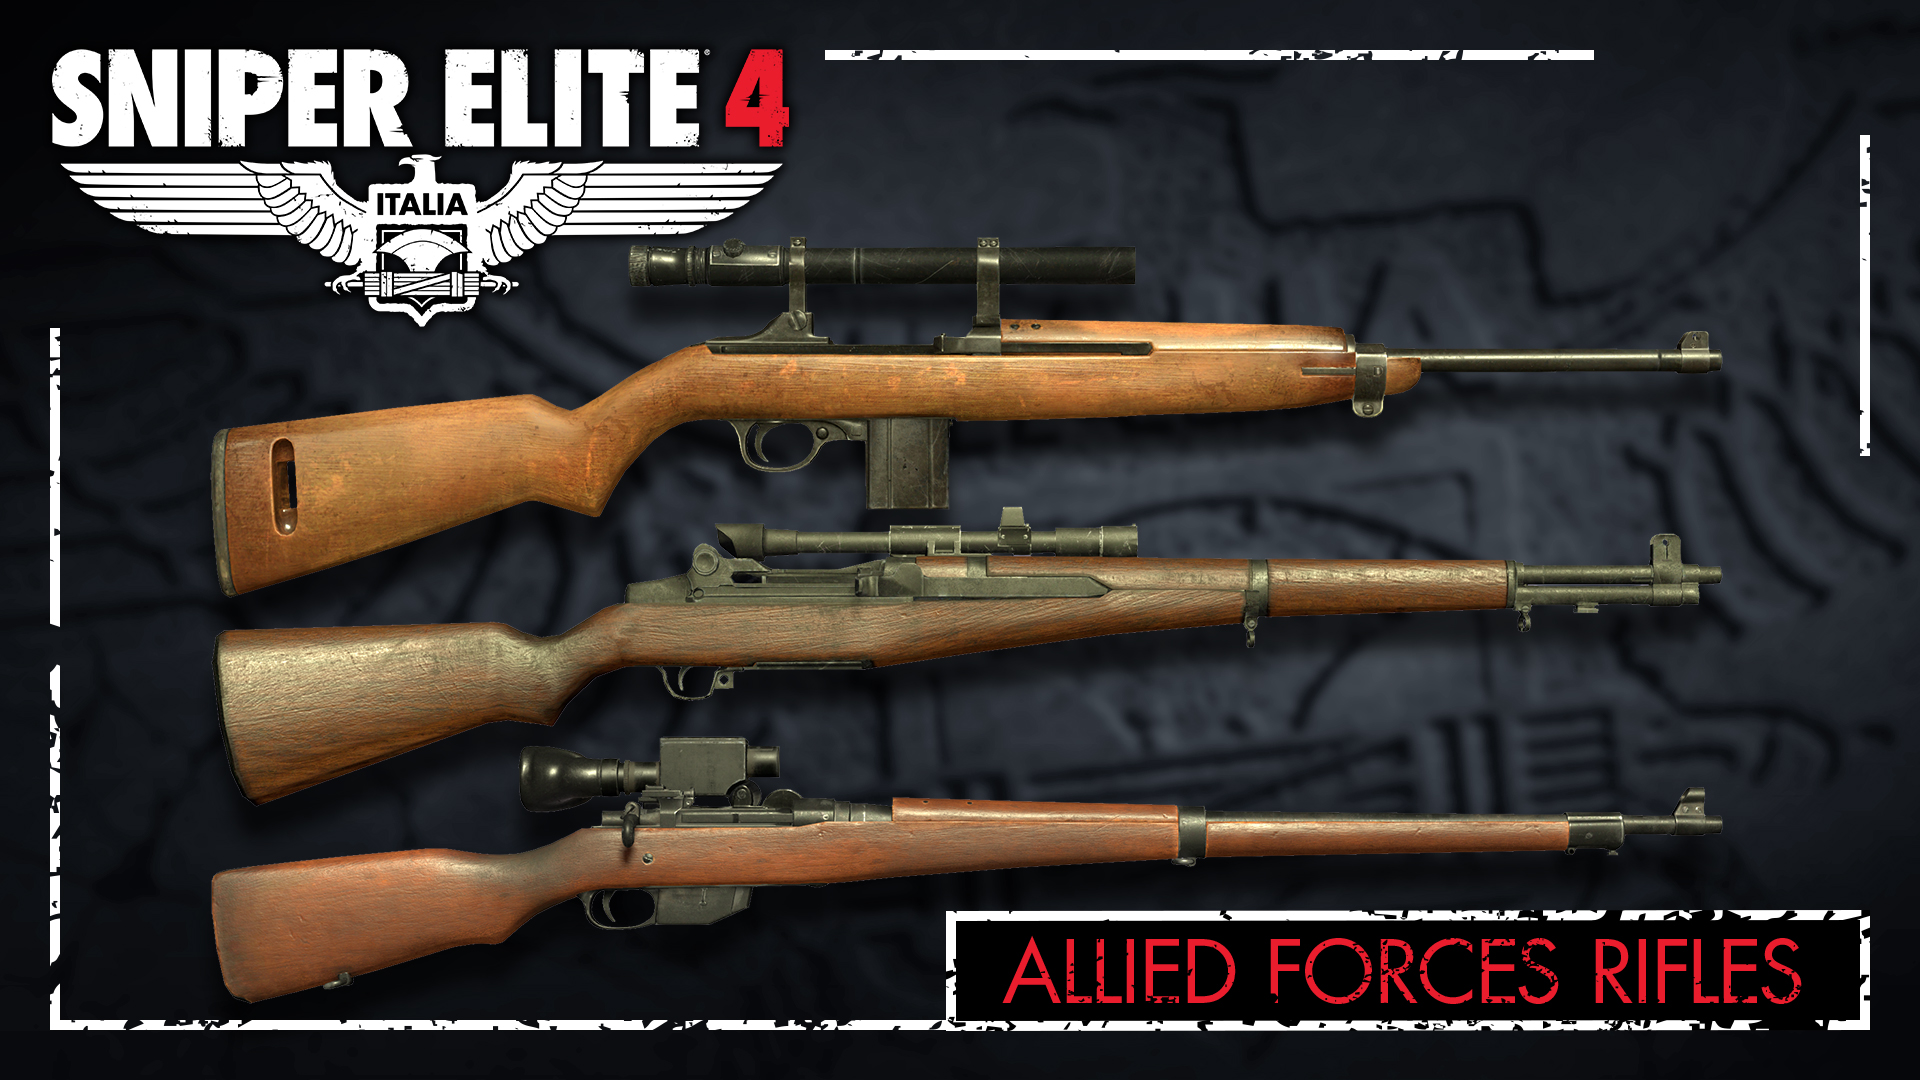 Sniper Elite 4 - Allied Forces Rifle Pack DLC Steam CD Key 4.51 usd